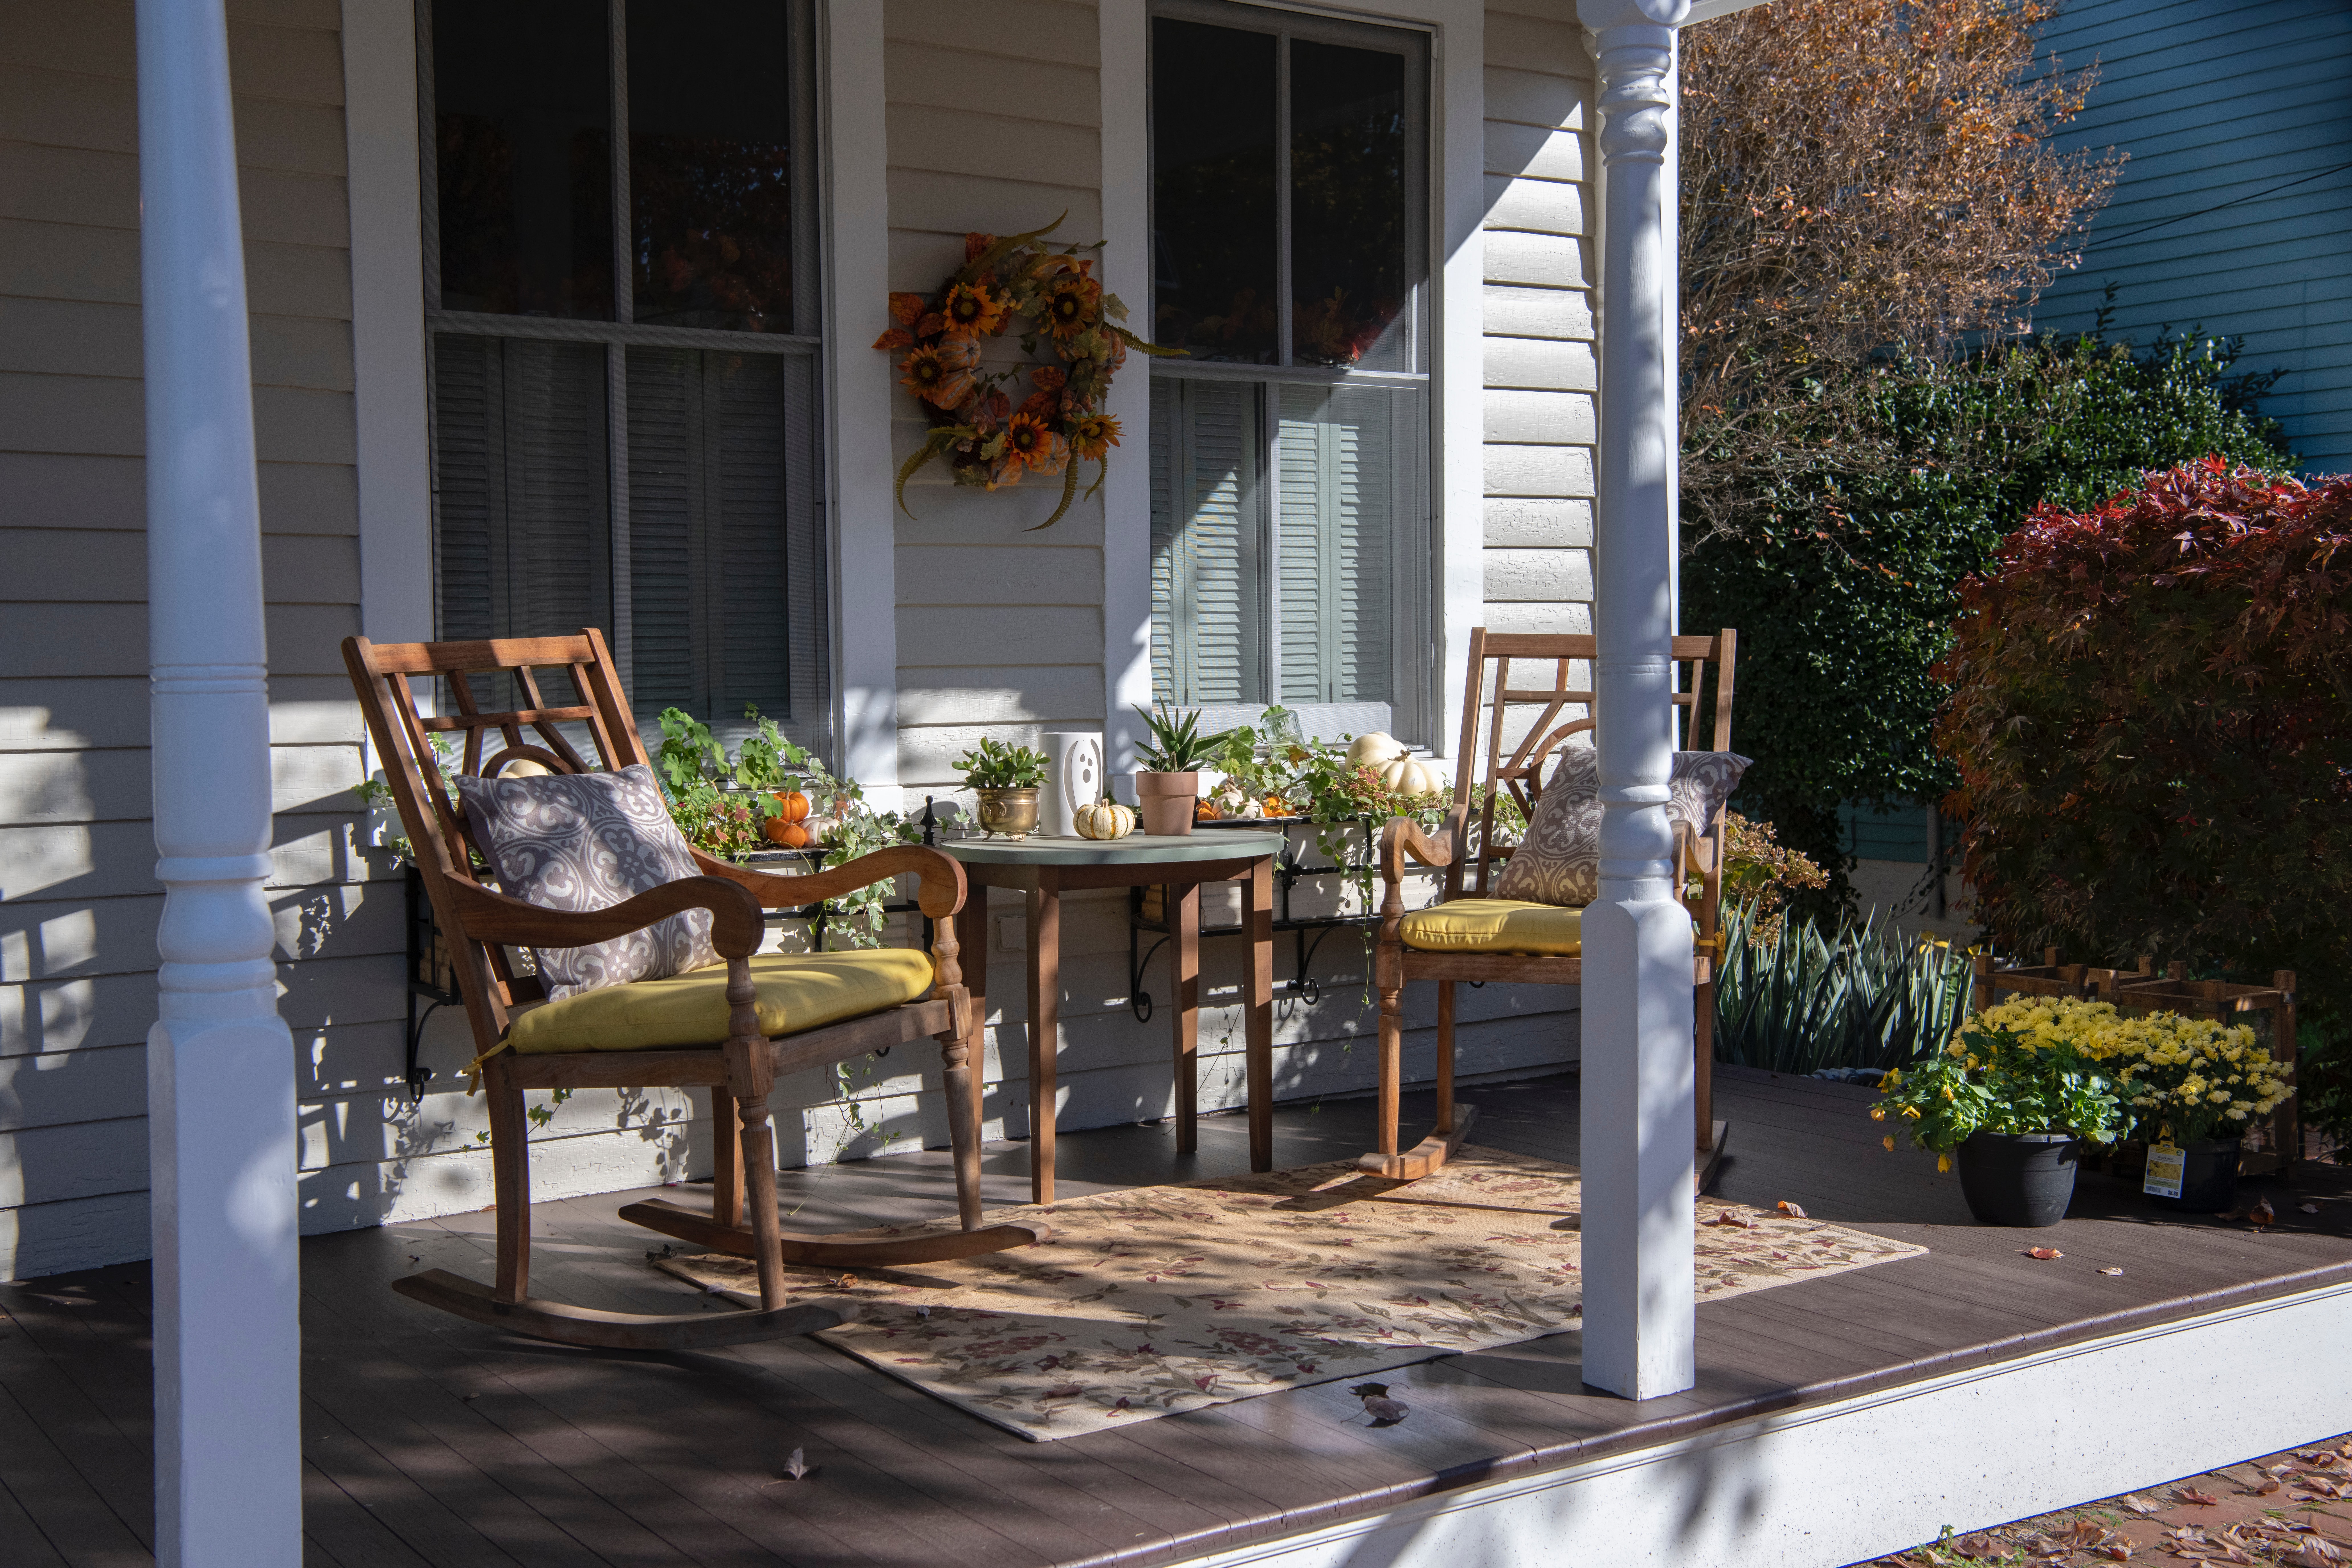 42 Porch Decorating Ideas to Inspire You